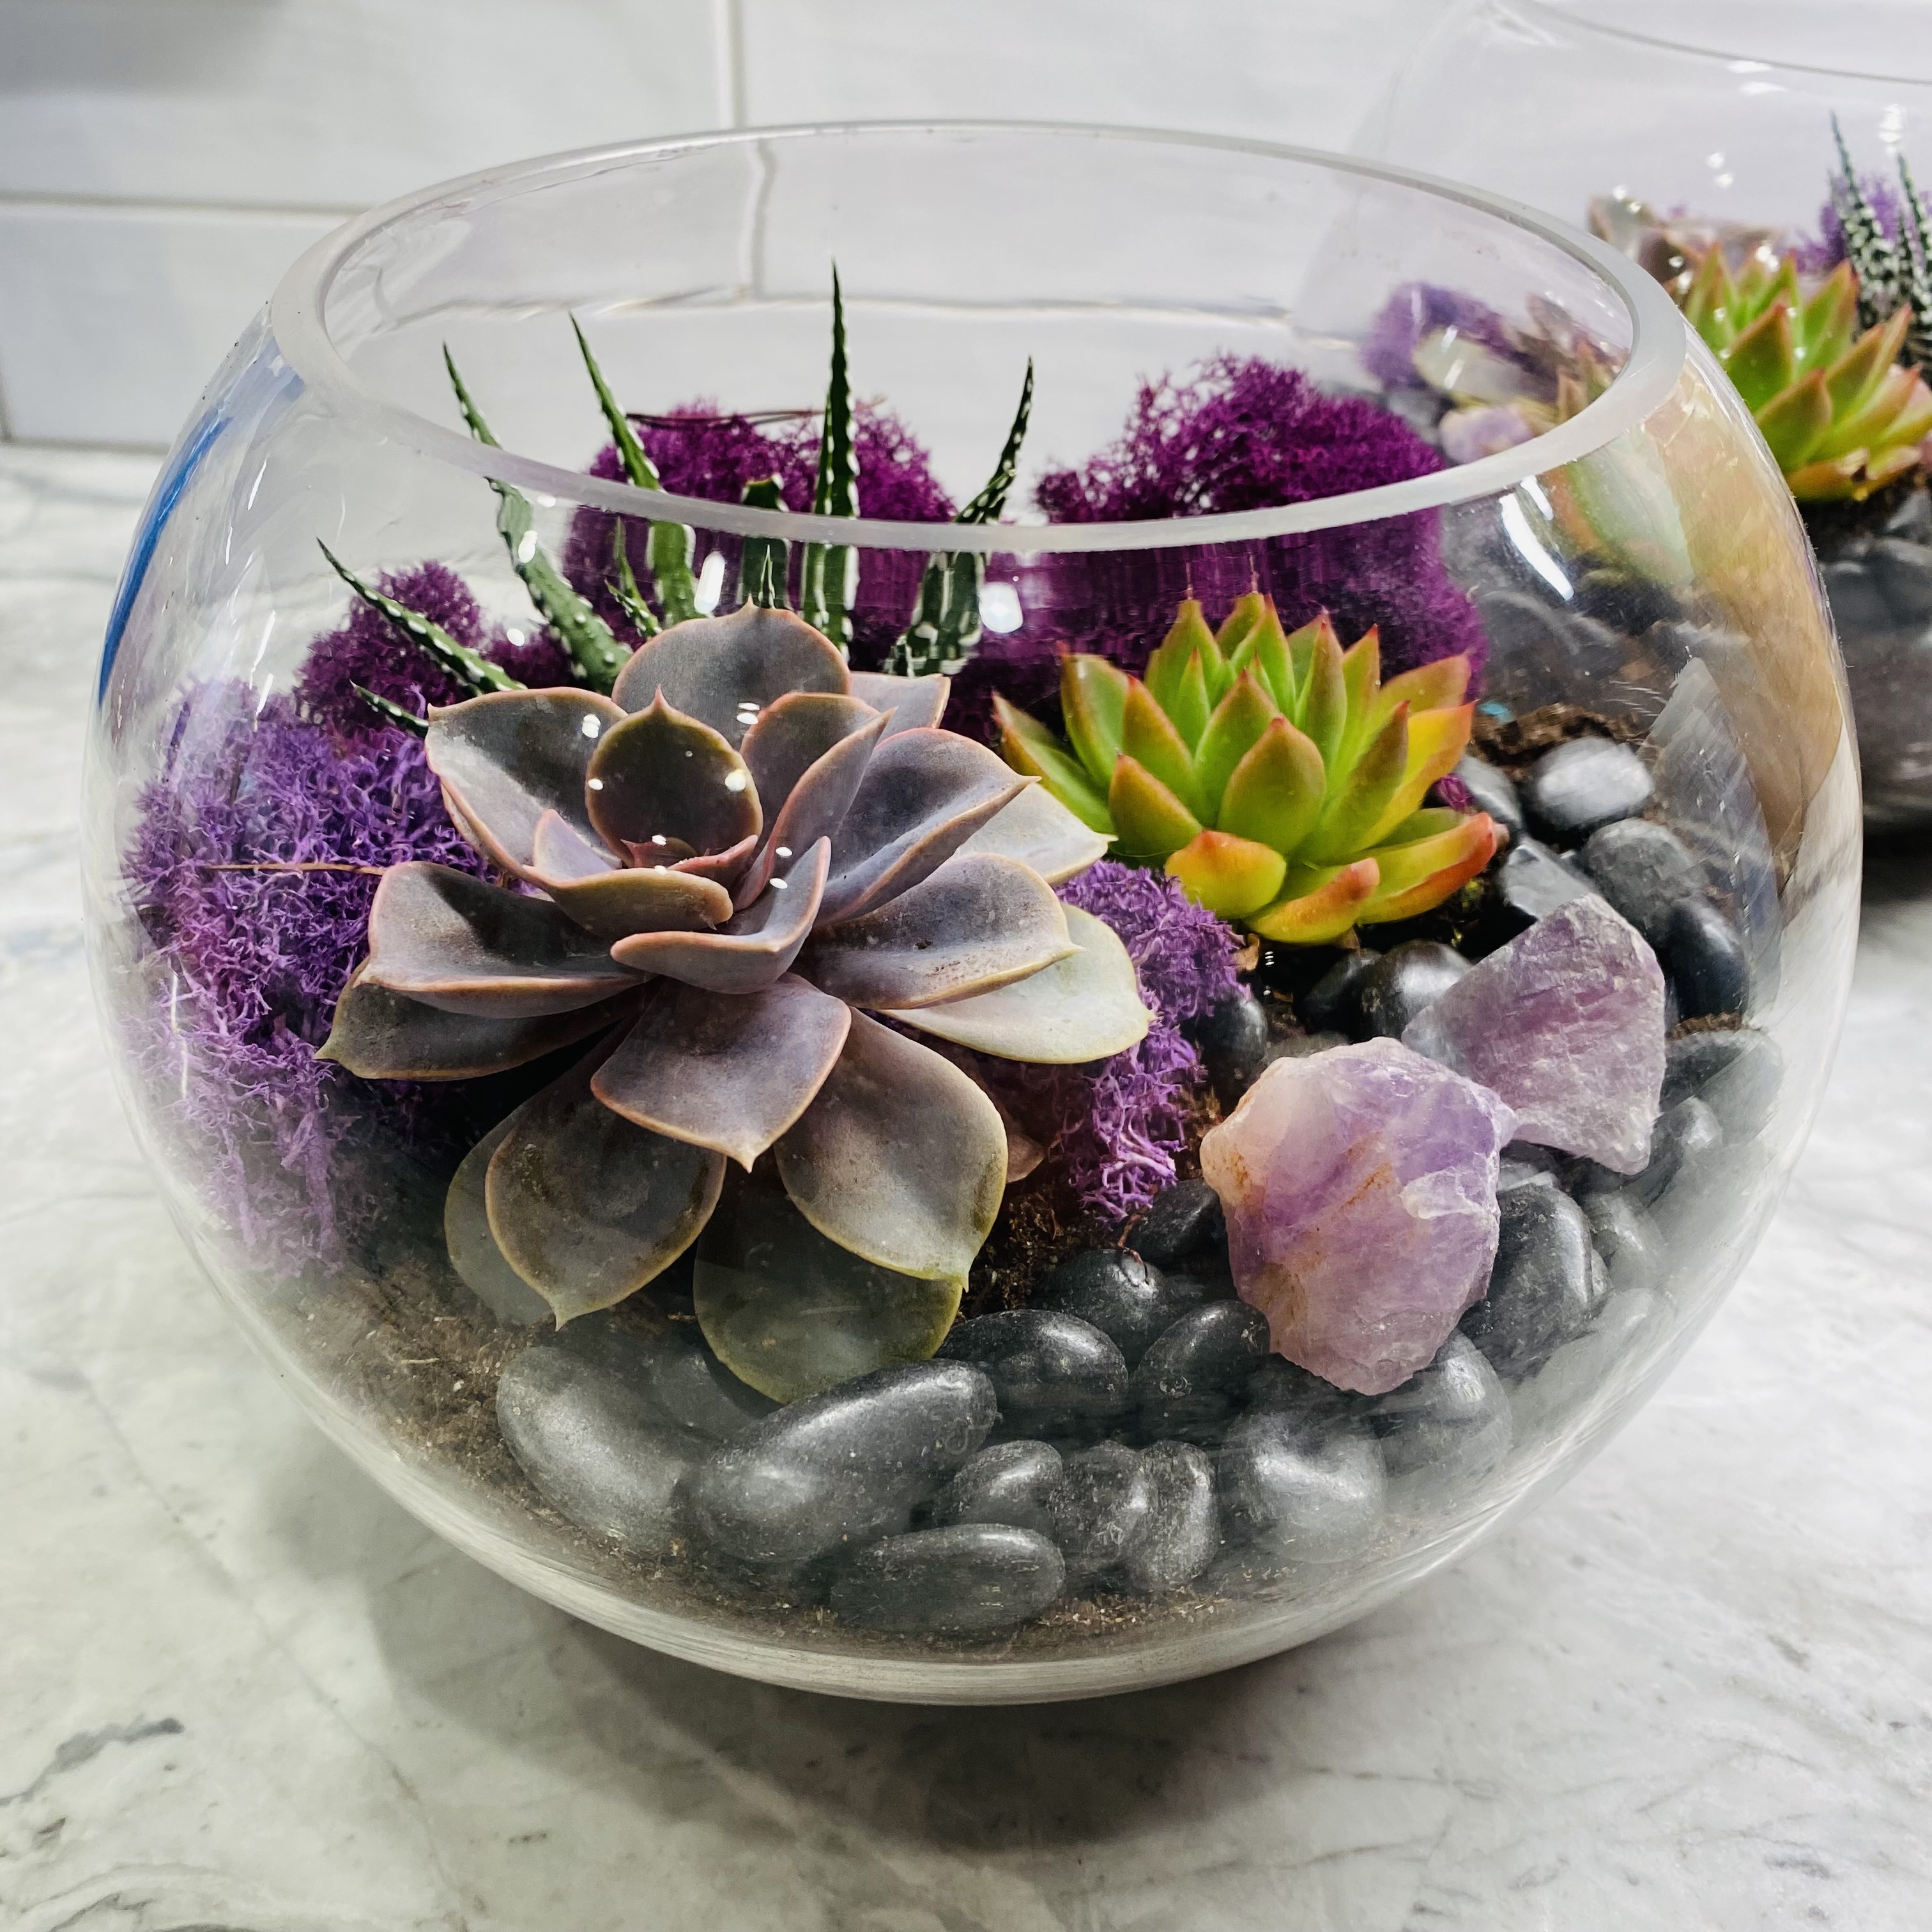 A Rose Bowl Amethyst Succulent Garden  experience project by Yaymaker